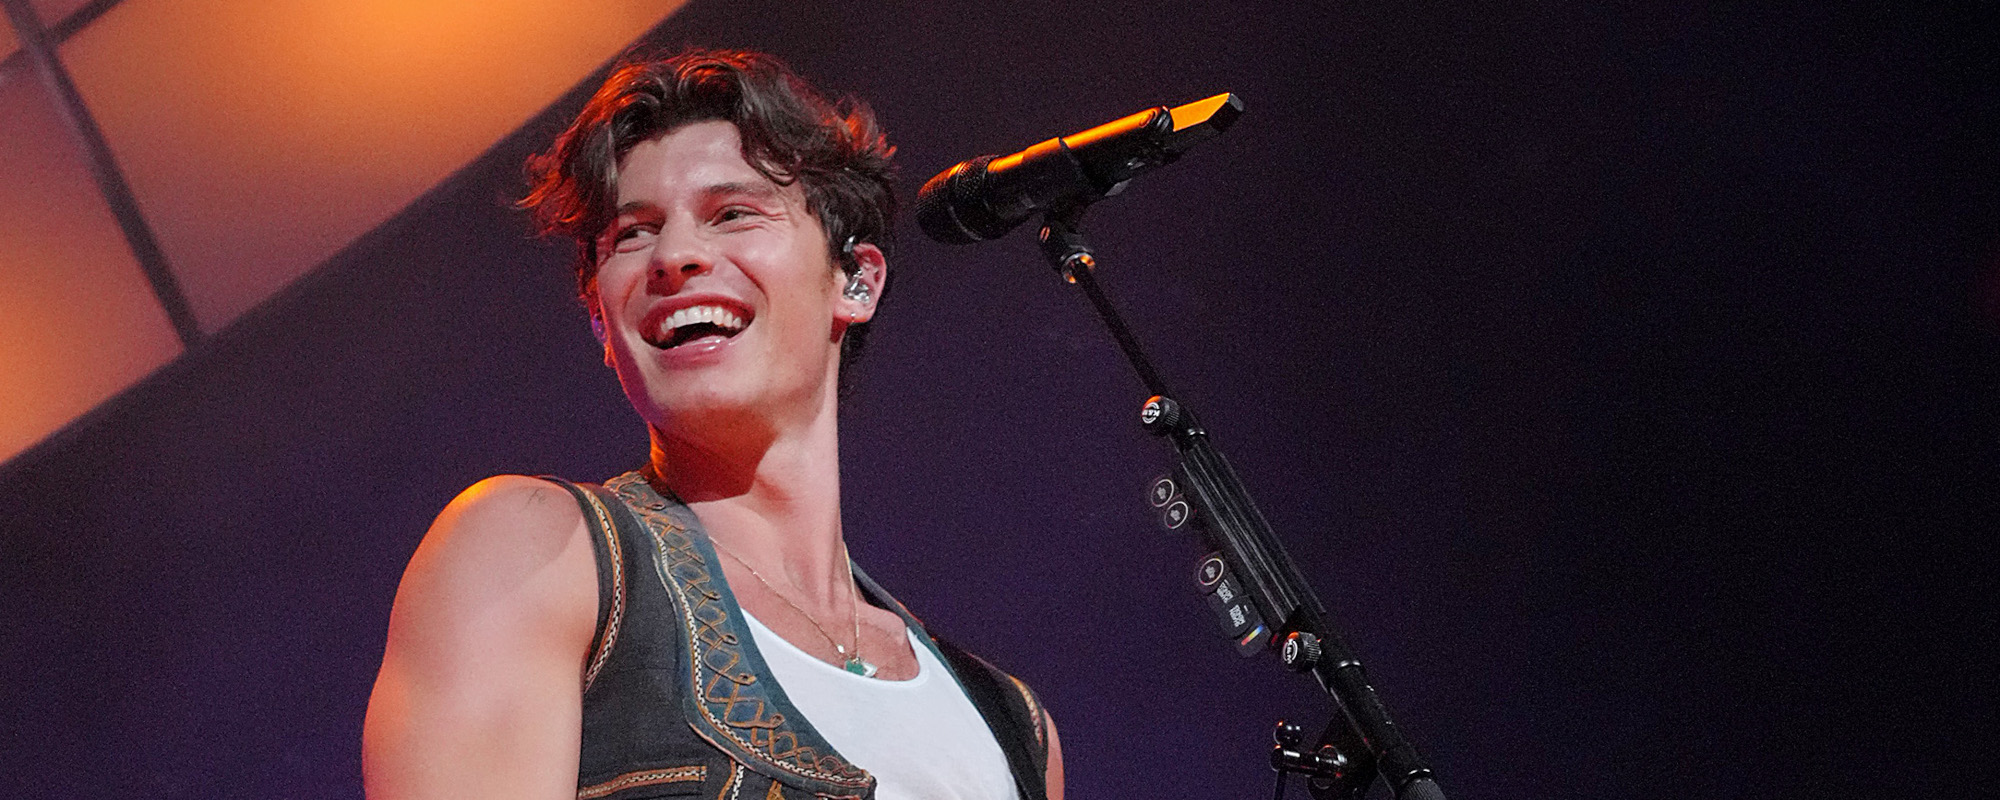 Shawn Mendes Returns to the Stage at Ed Sheeran Concert